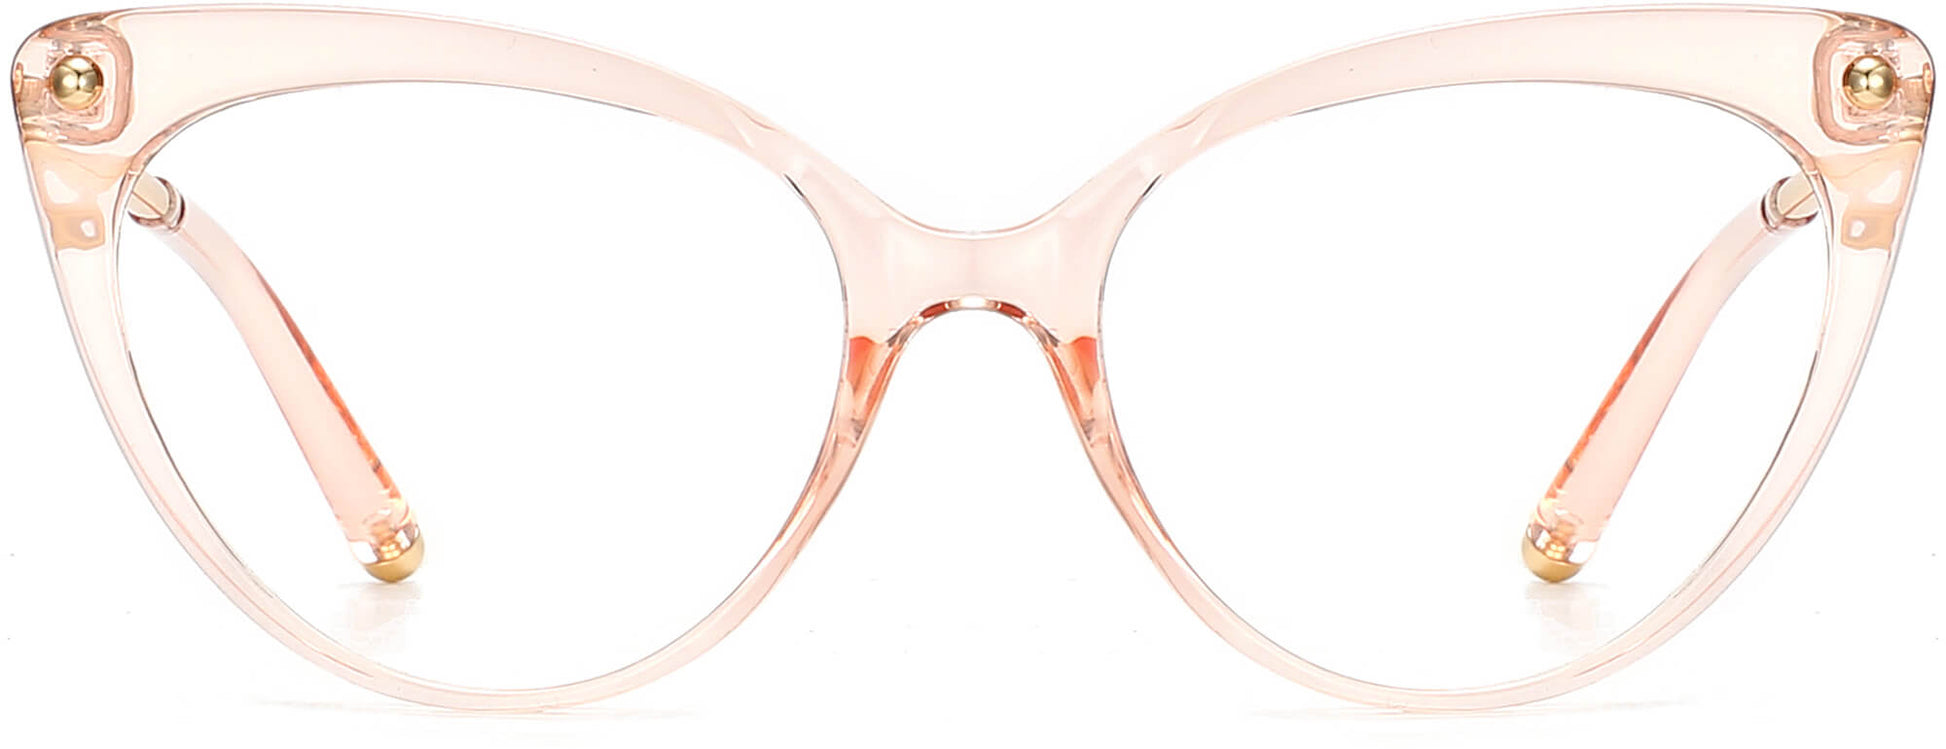 Leona Cateye Pink Eyeglasses from ANRRI, front view